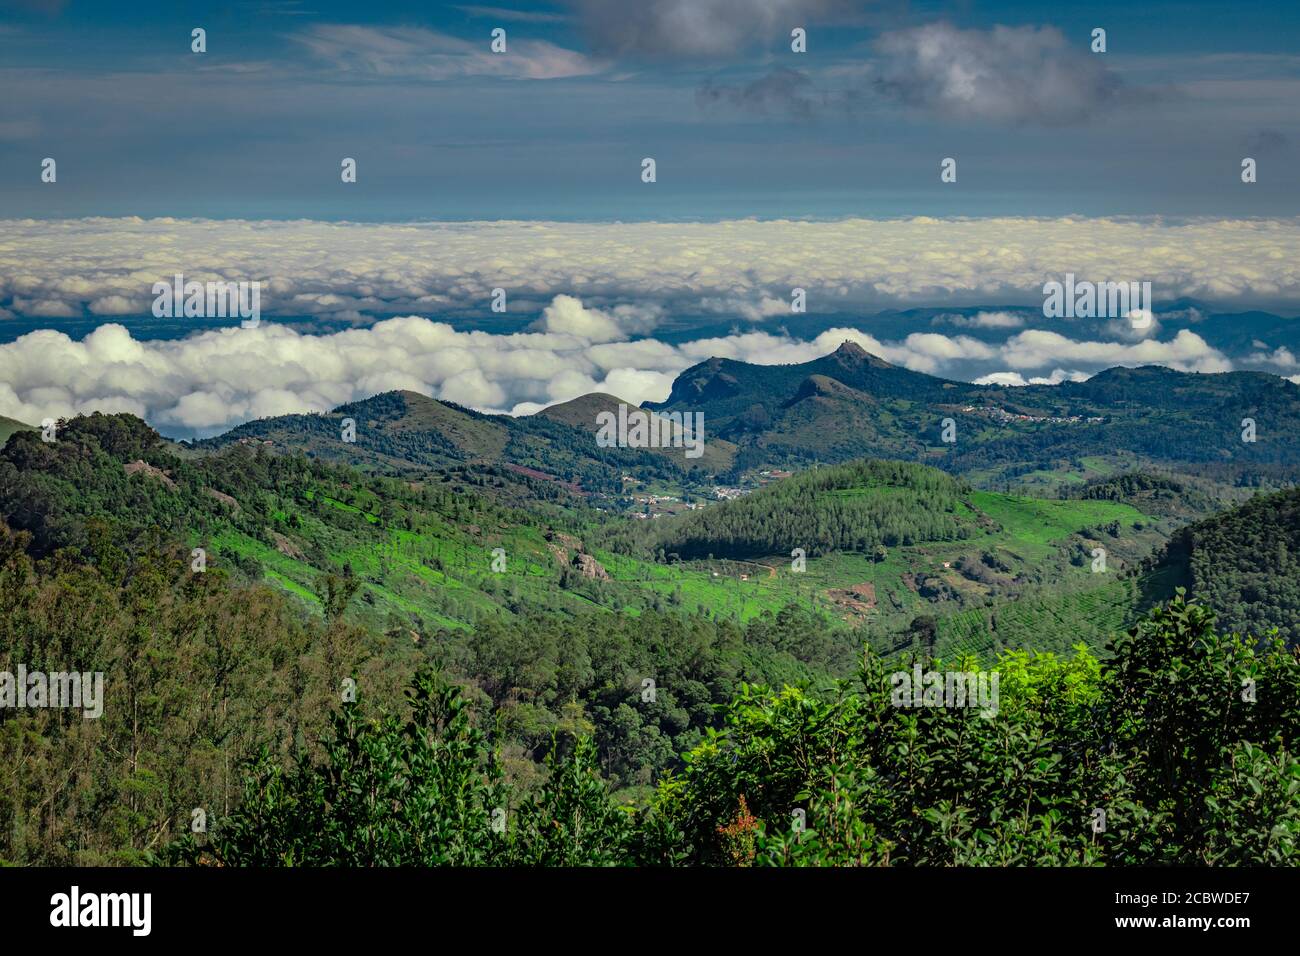 mountain range with cloud layers and green forest image is taken at south india. it is showing the beautiful landscape of south india. Stock Photo